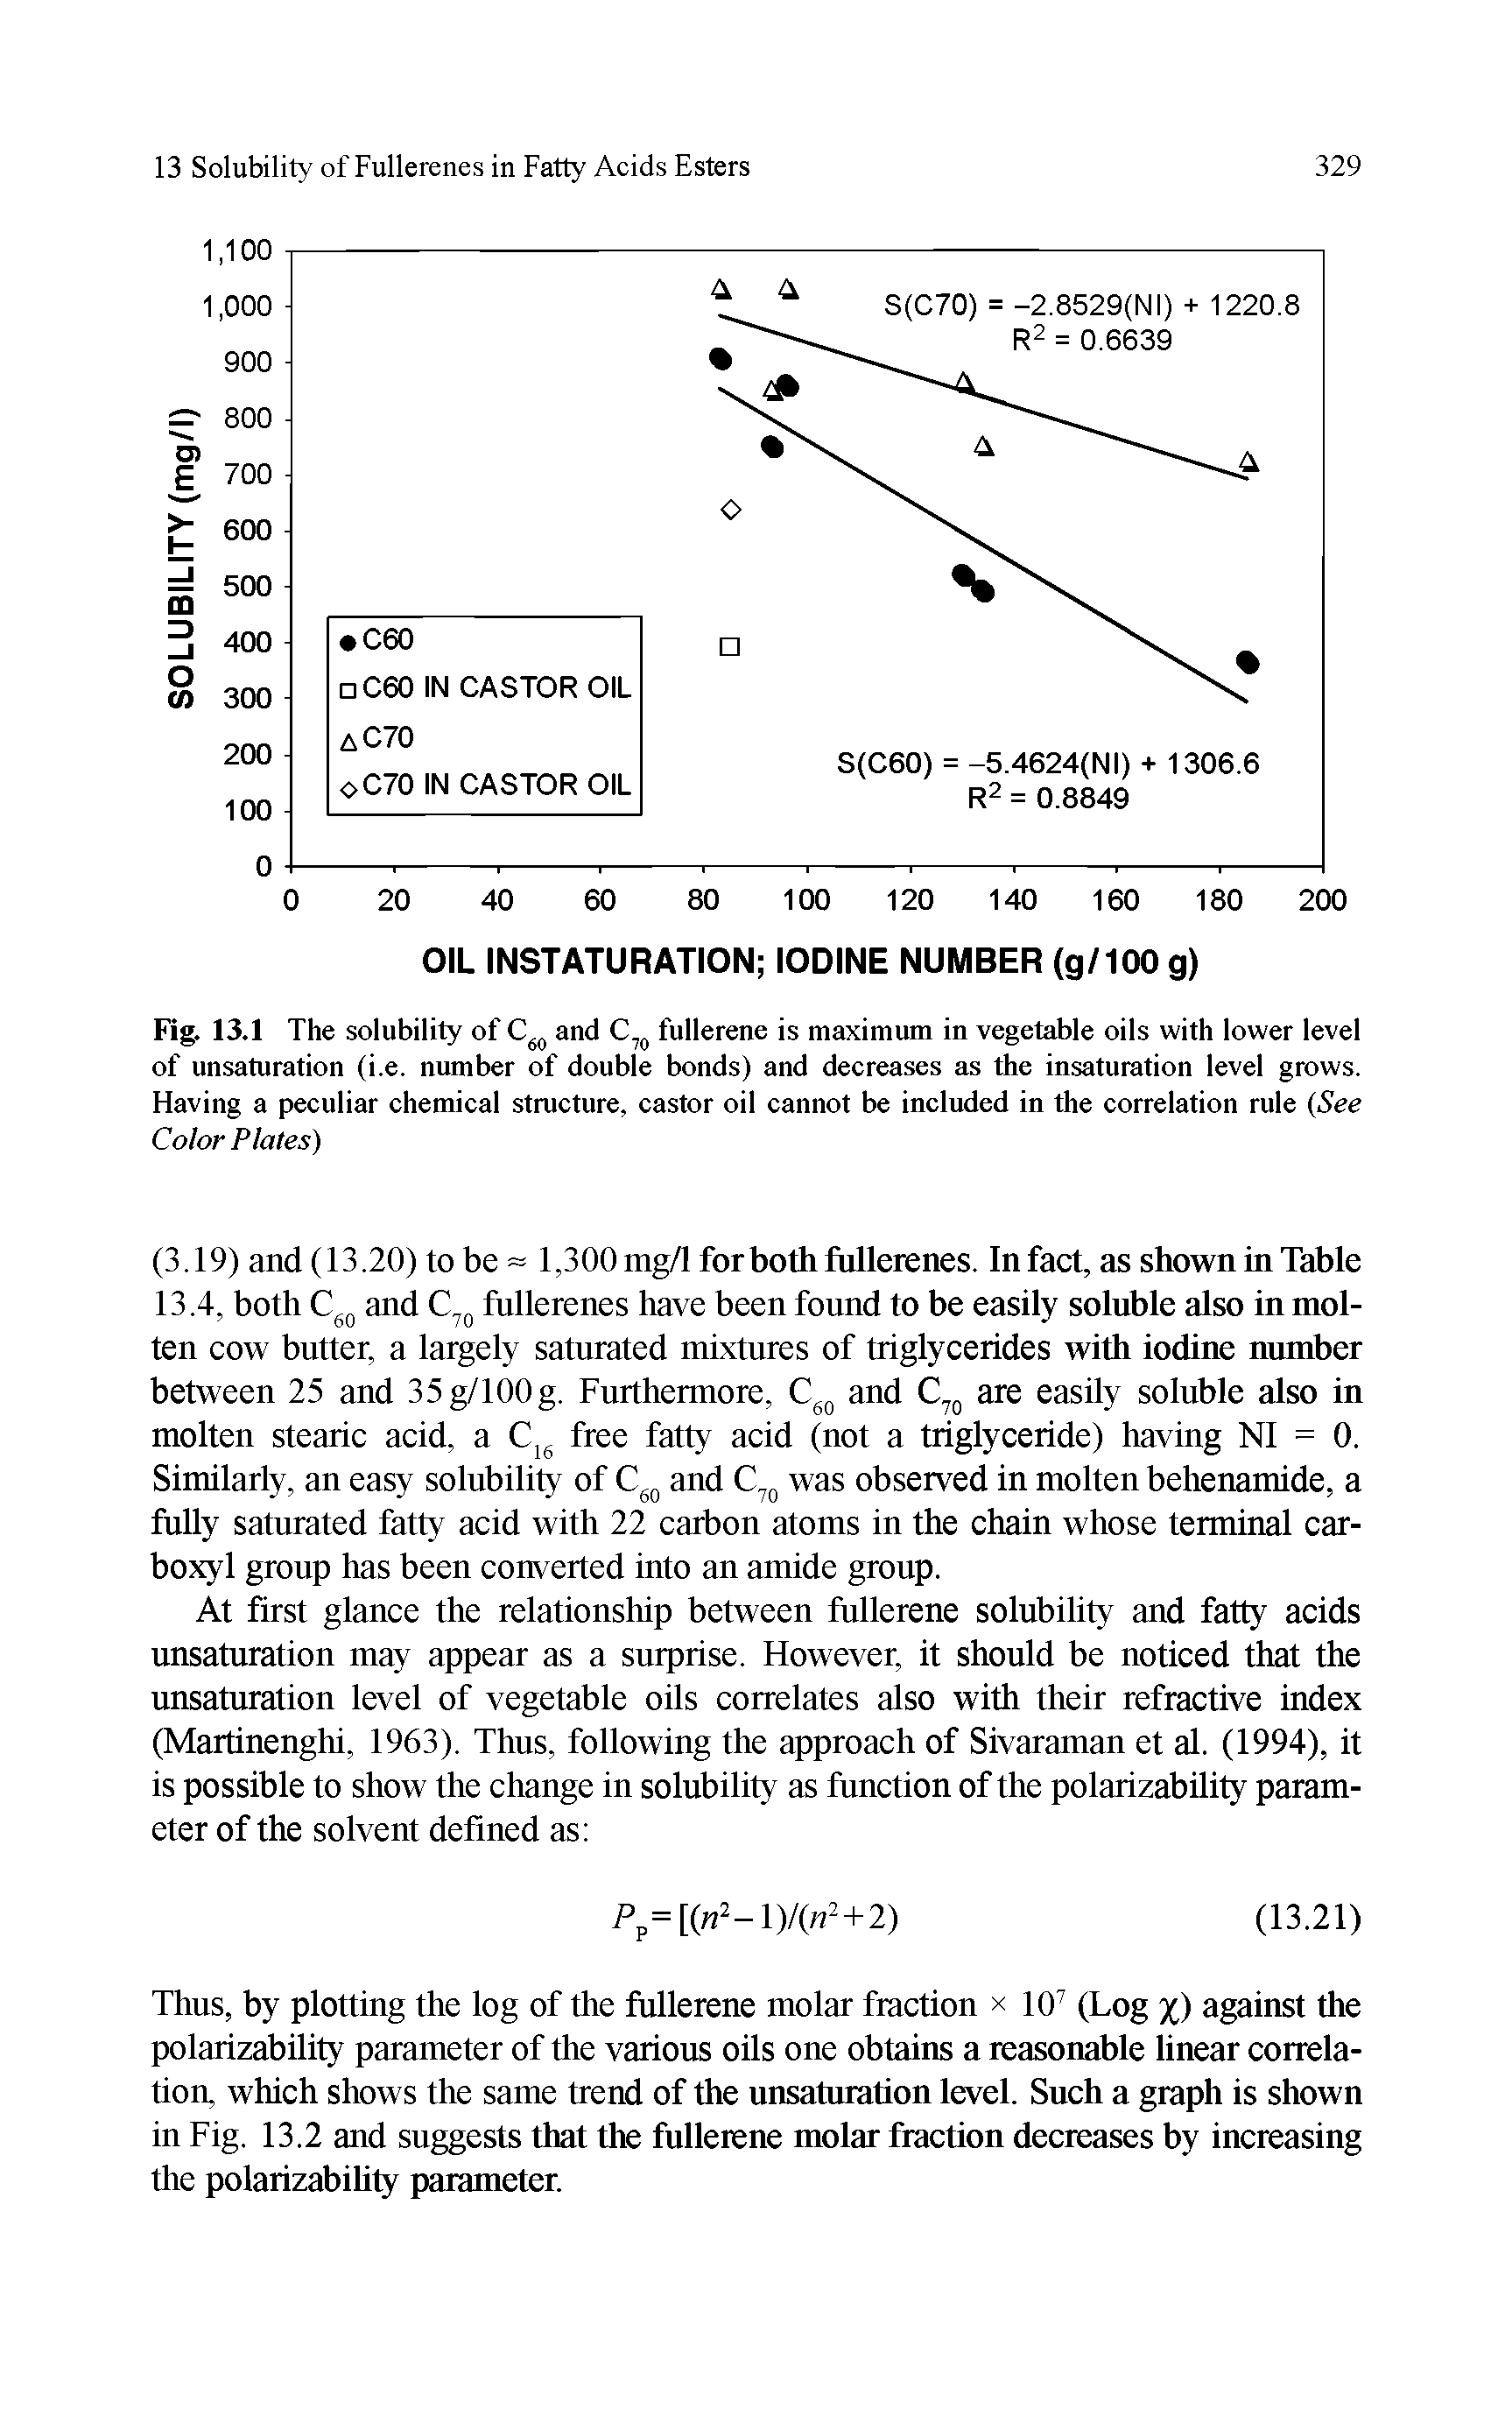 Fig. 13.1 The solubility of C60 and C70 fullerene is maximum in vegetable oils with lower level of unsaturation (i.e. number of double bonds) and decreases as the insaturation level grows. Having a peculiar chemical structure, castor oil cannot be included in the correlation rule (See Color Plates)...